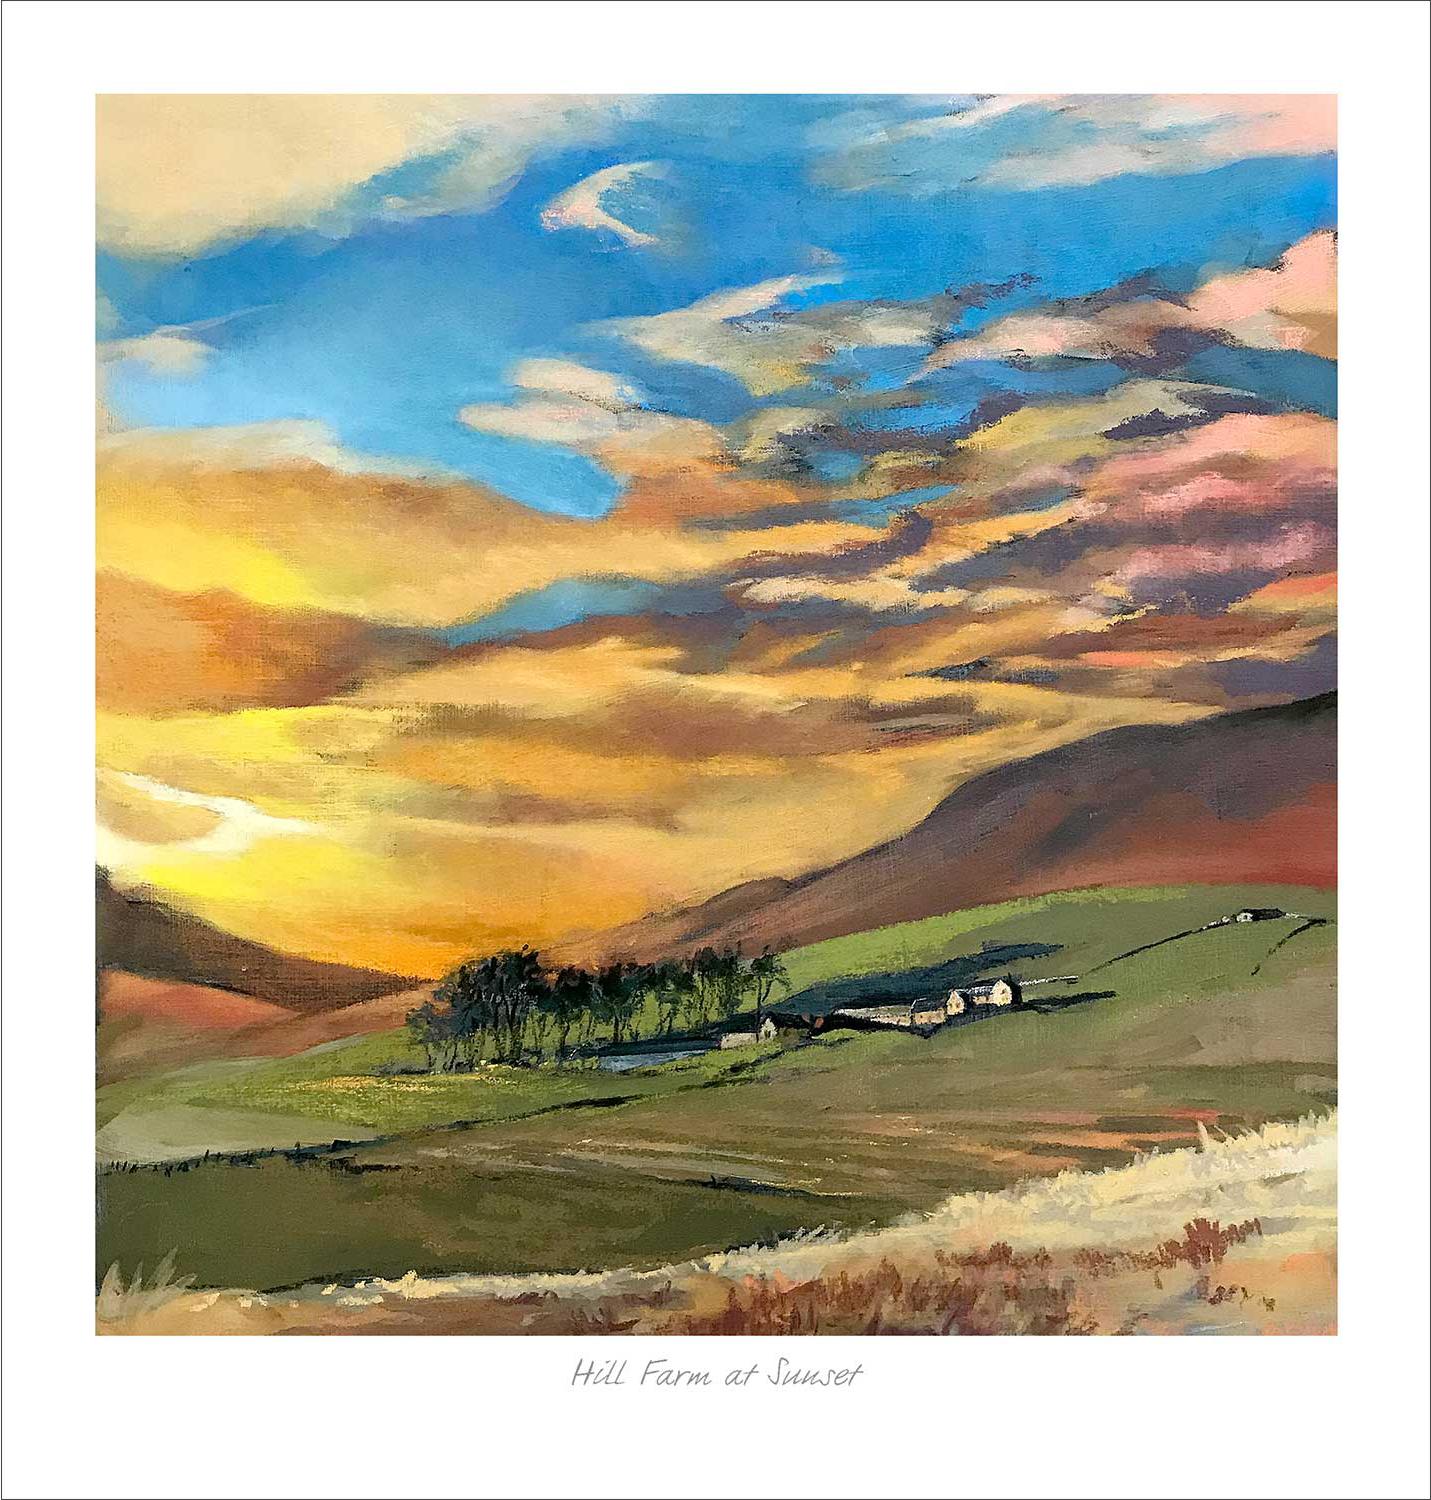 Hill Farm by Sunset Art Print from an original painting by artist Margaret Evans